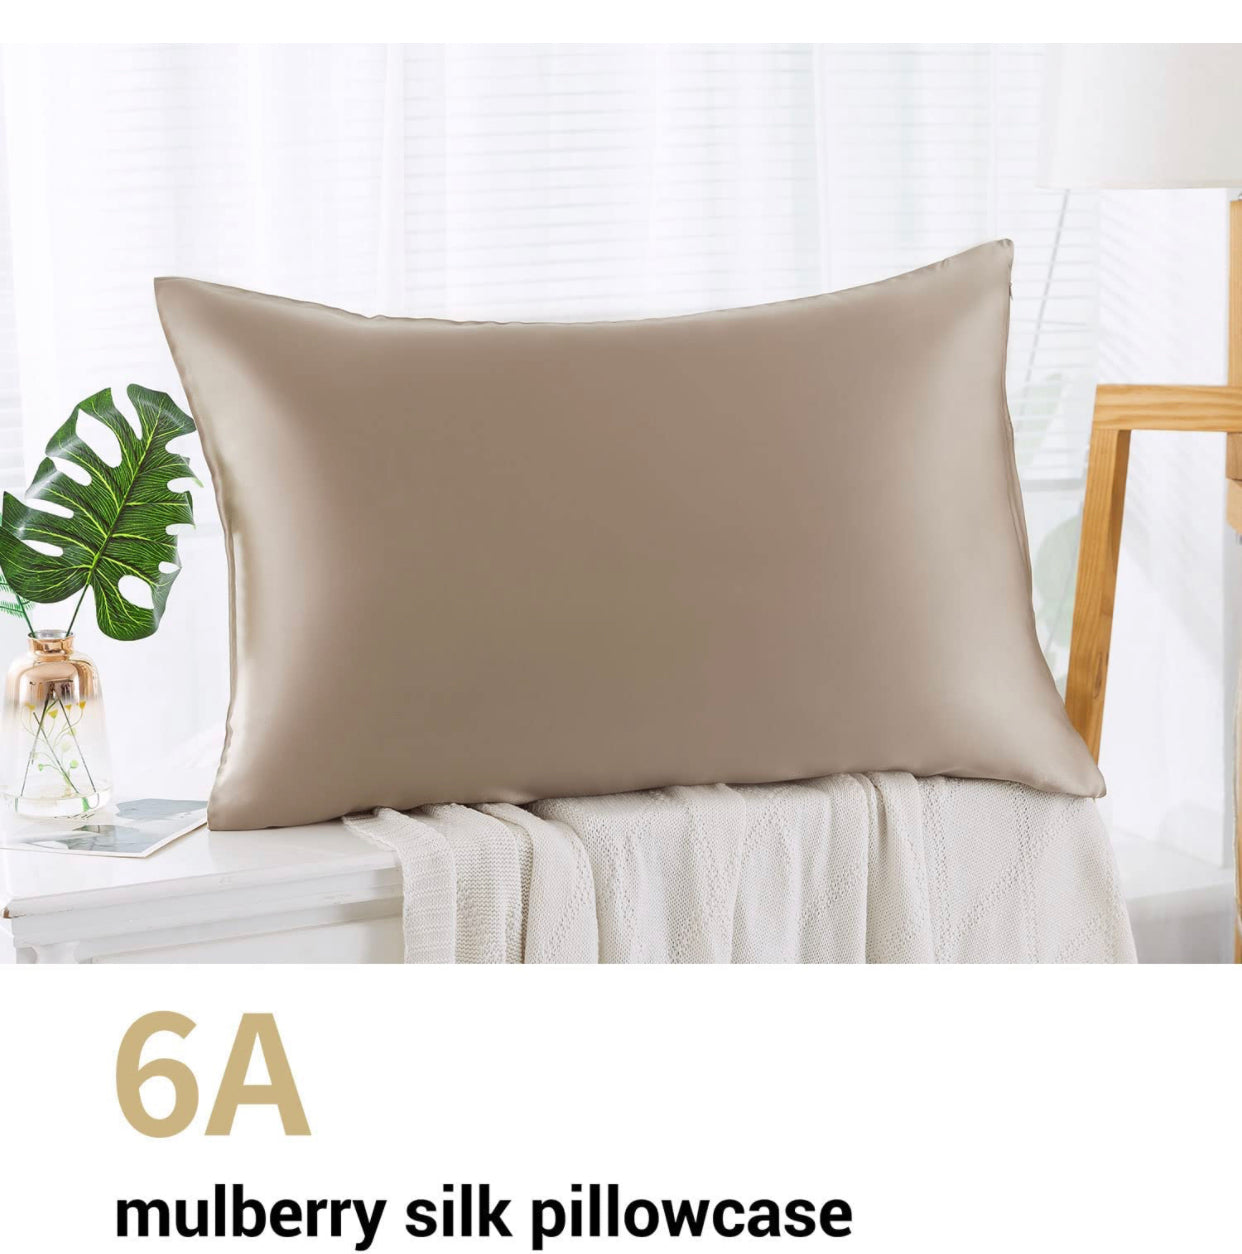 Mulberry Silk Pillowcase - 20” by 30” - Queen Pillowcase - Taupe, Light Green, Ivory, White)